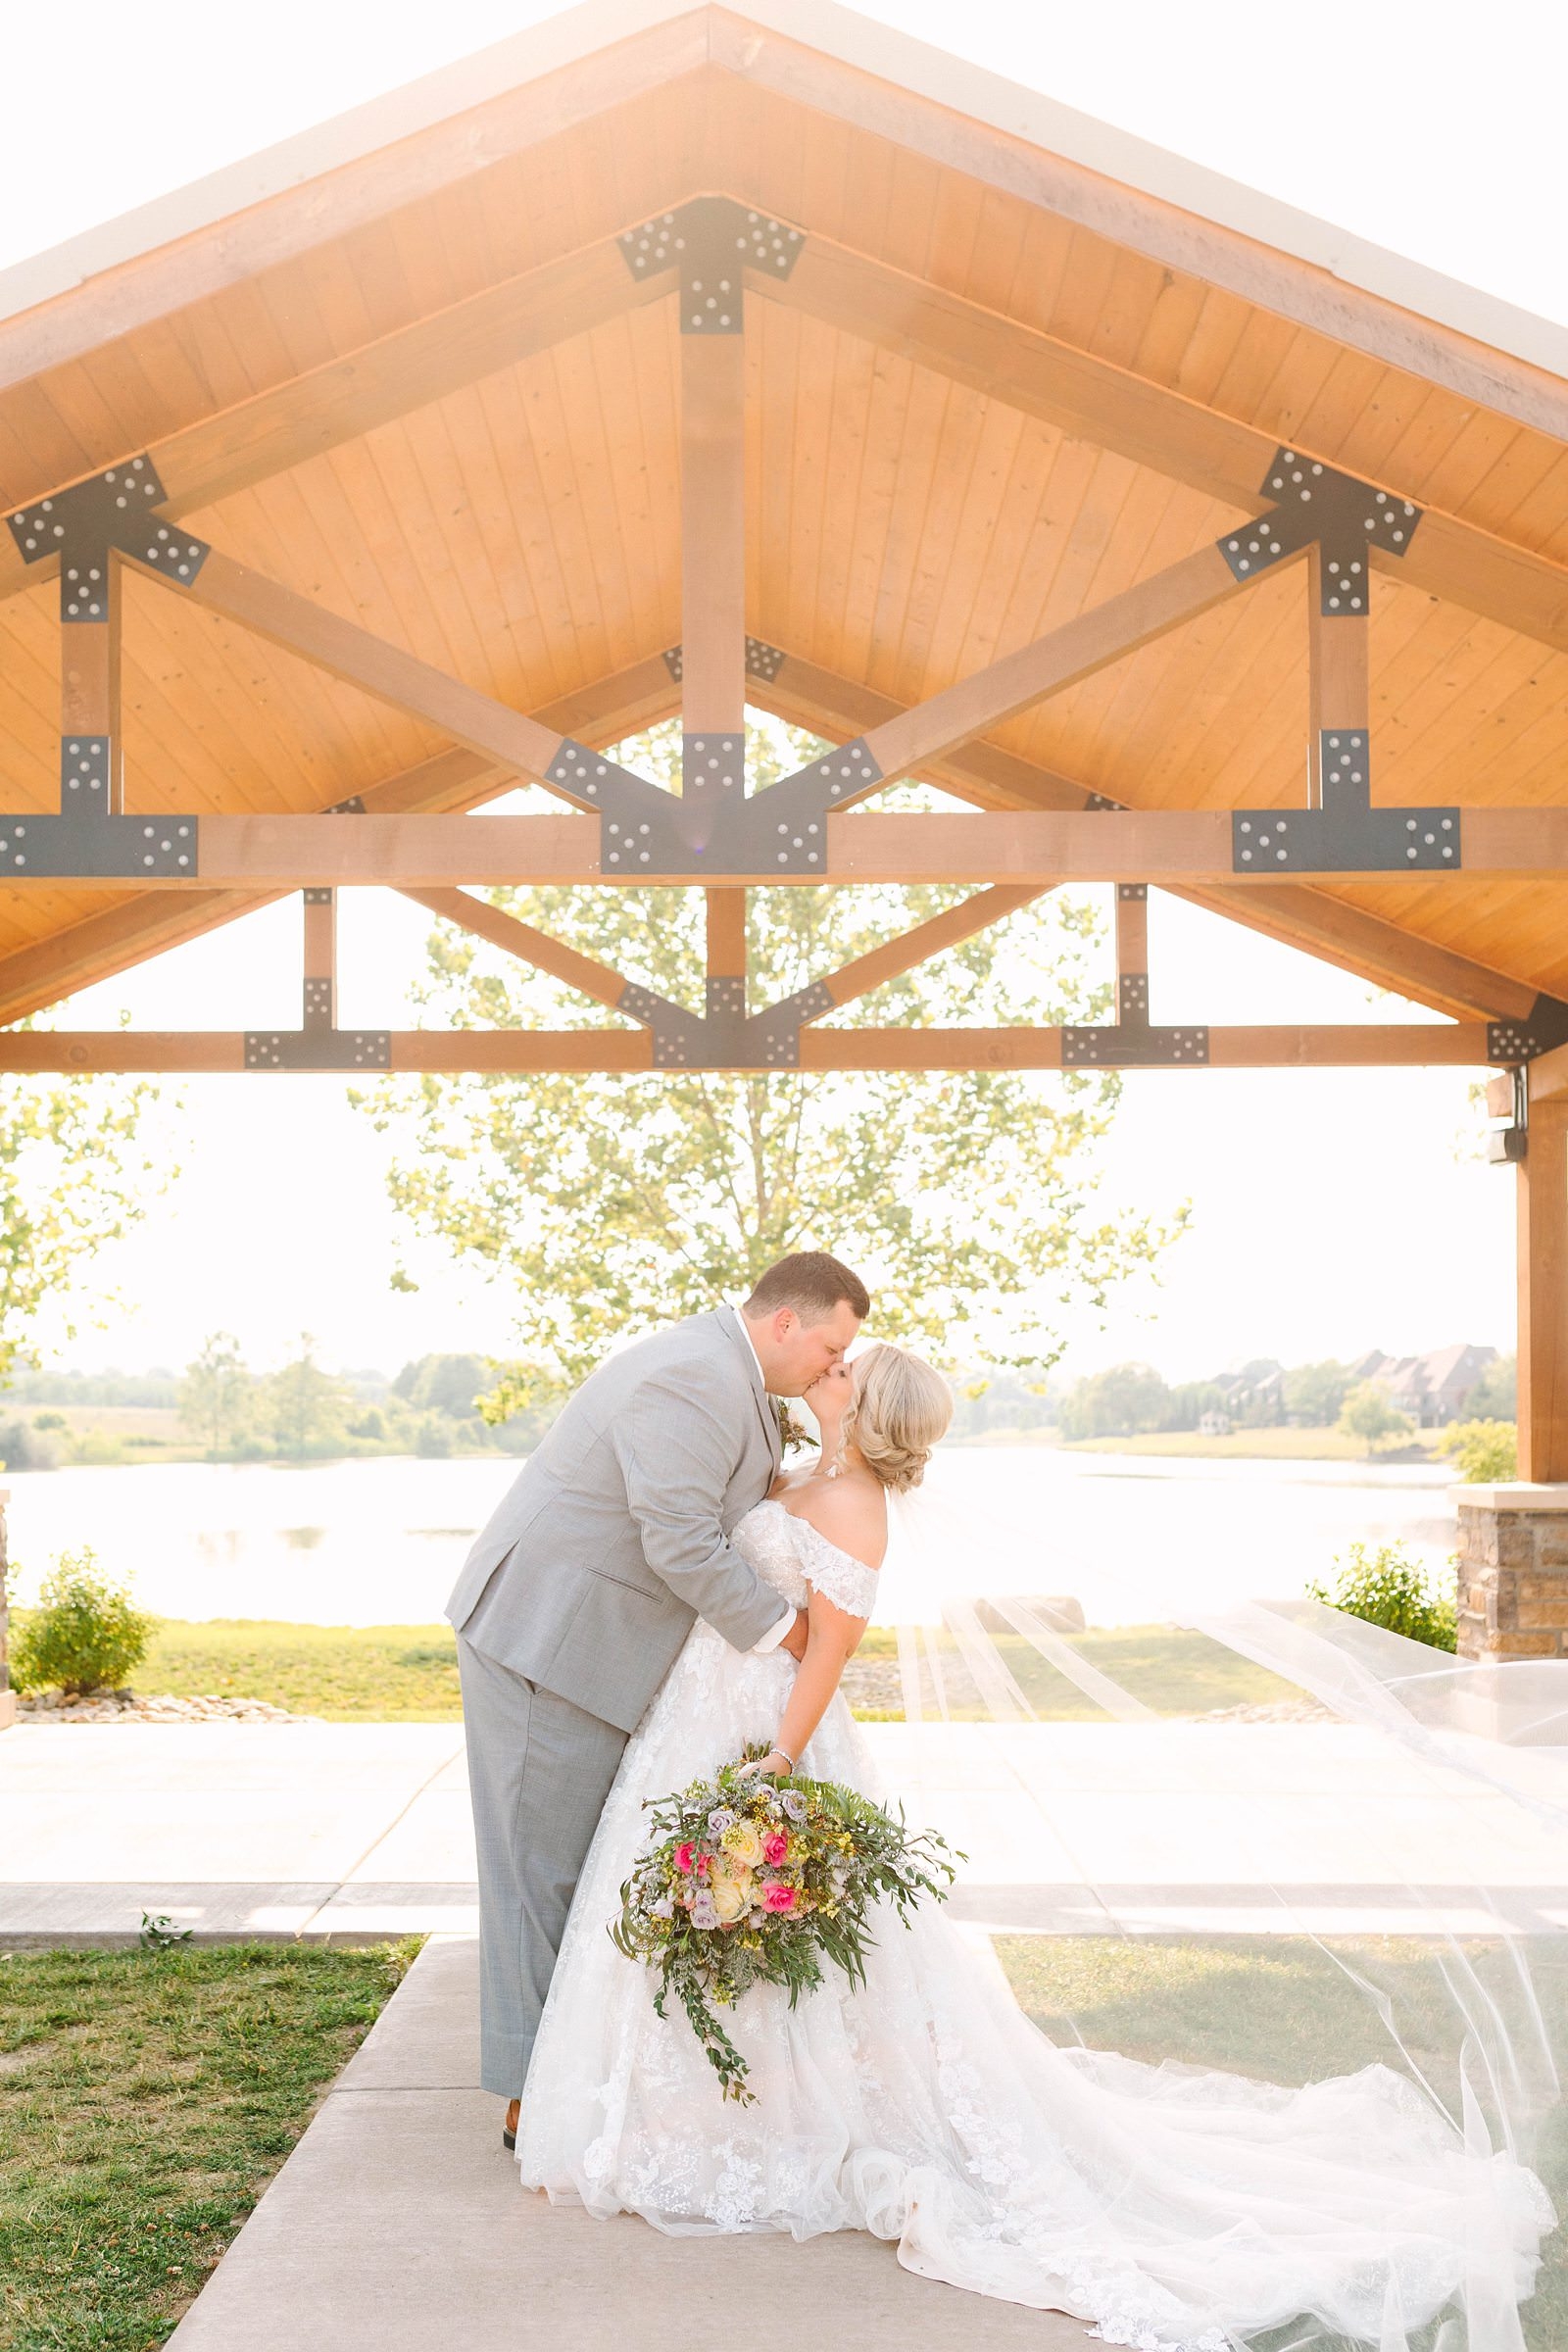 A Sunny Summer Wedding at Friedman Park in Newburgh Indiana | Paige and Dylan | Bret and Brandie Photography147.jpg